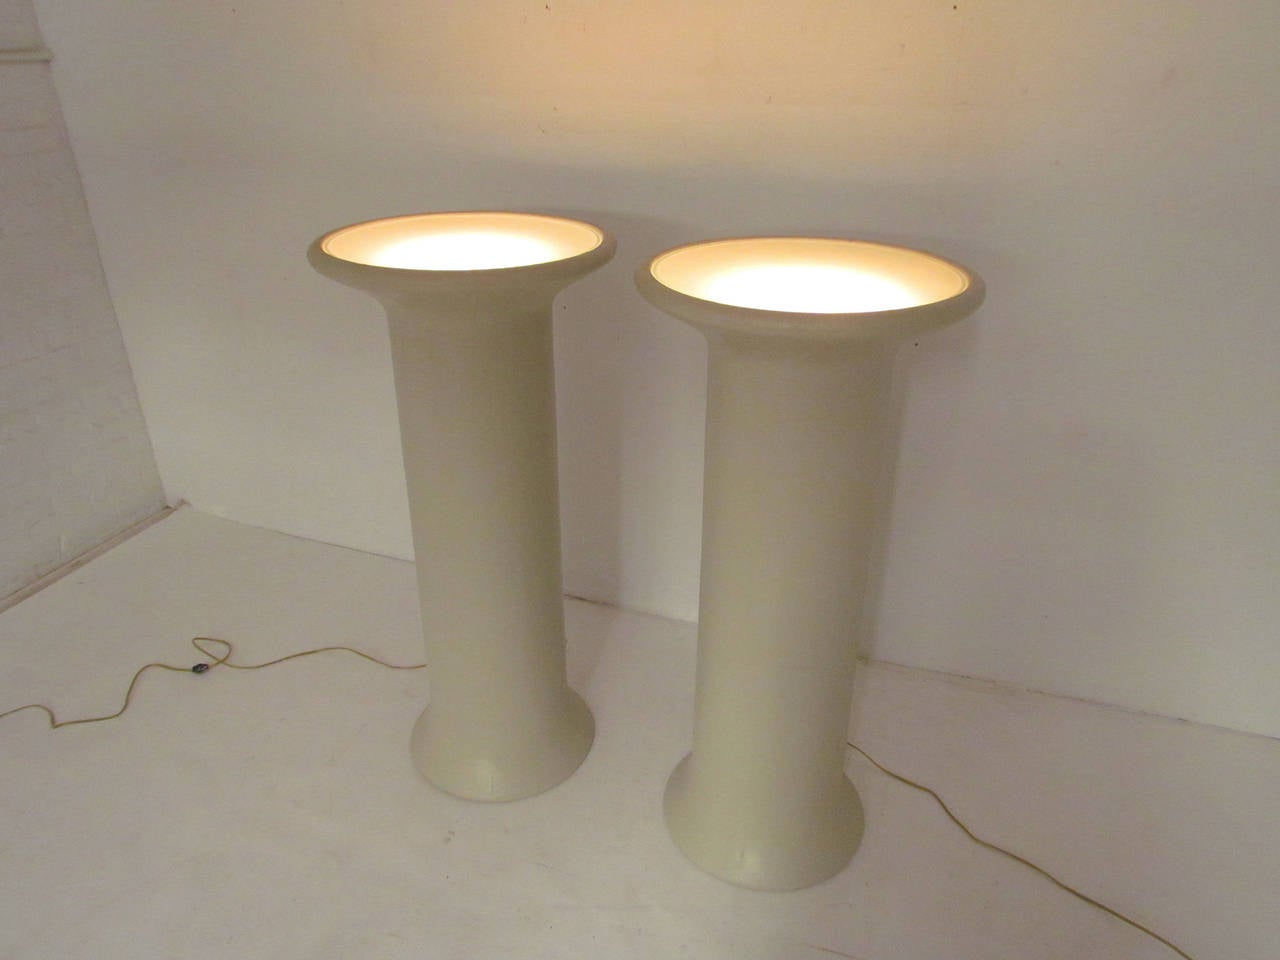 Pair of Lighted Linen Wrapped Pedestals in the Manner of Karl Springer In Good Condition For Sale In Peabody, MA